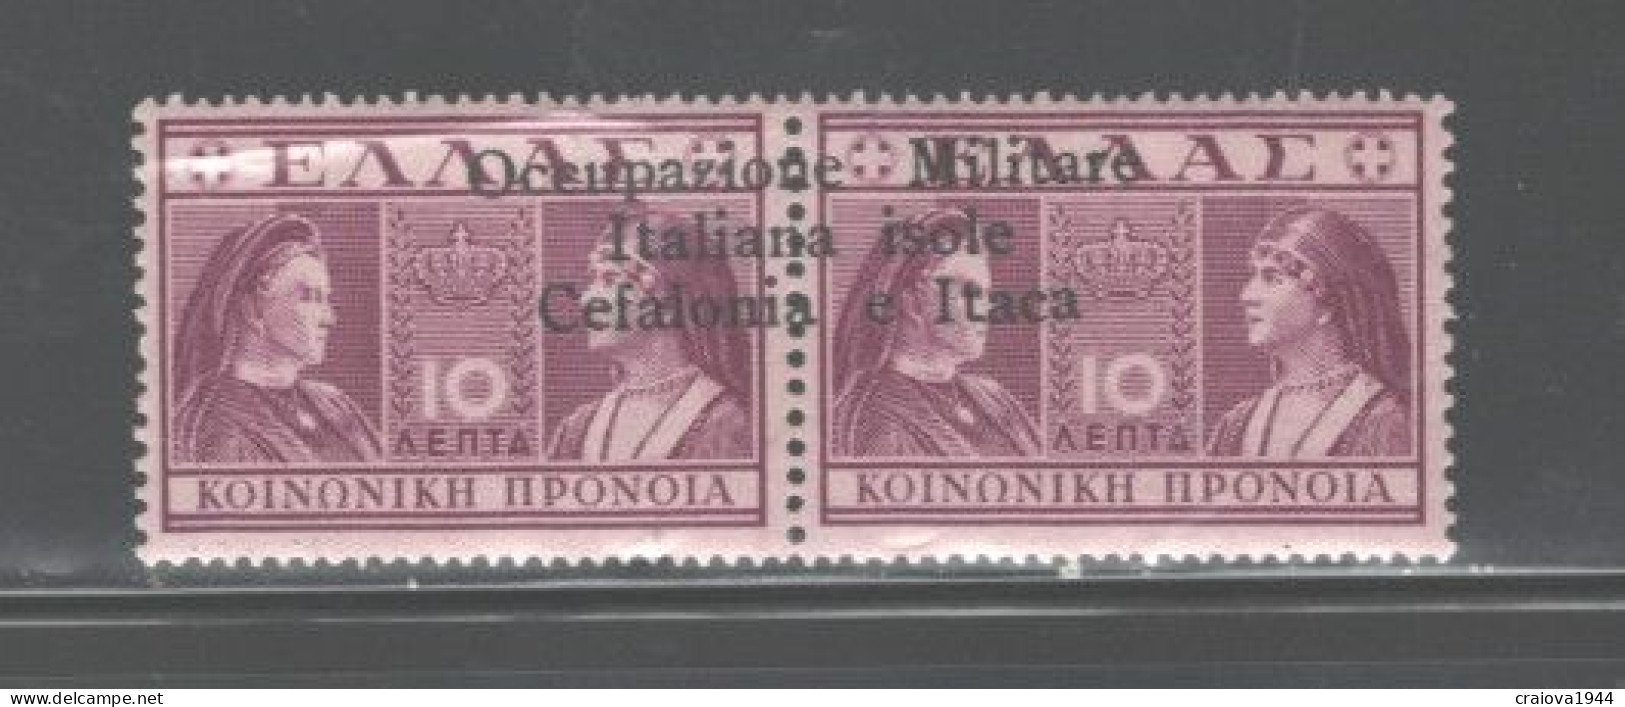 GREECE,1941"ISSUE FOR CEPHALONIA & ITHACA"#NR2a,Horz.OVPT. MNH, CERT. - Ionian Islands